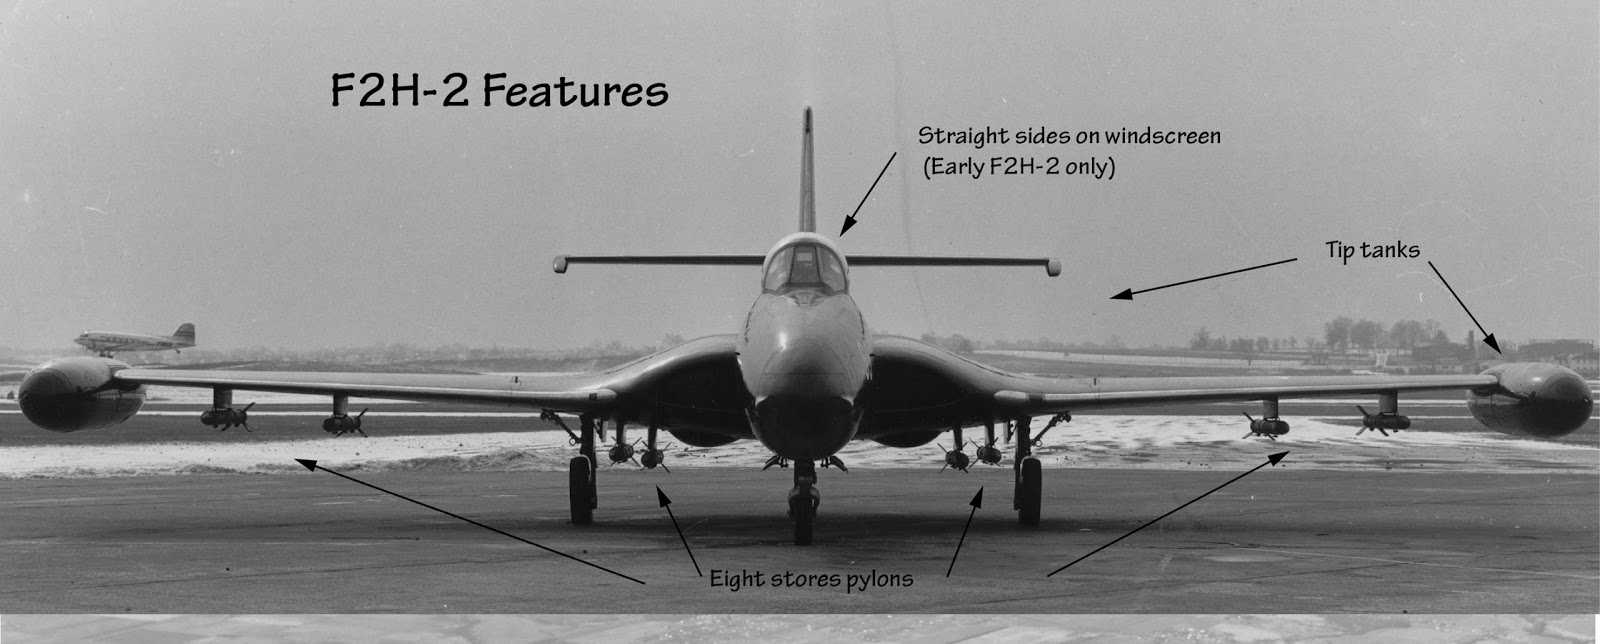 F2H-2+Features.jpg